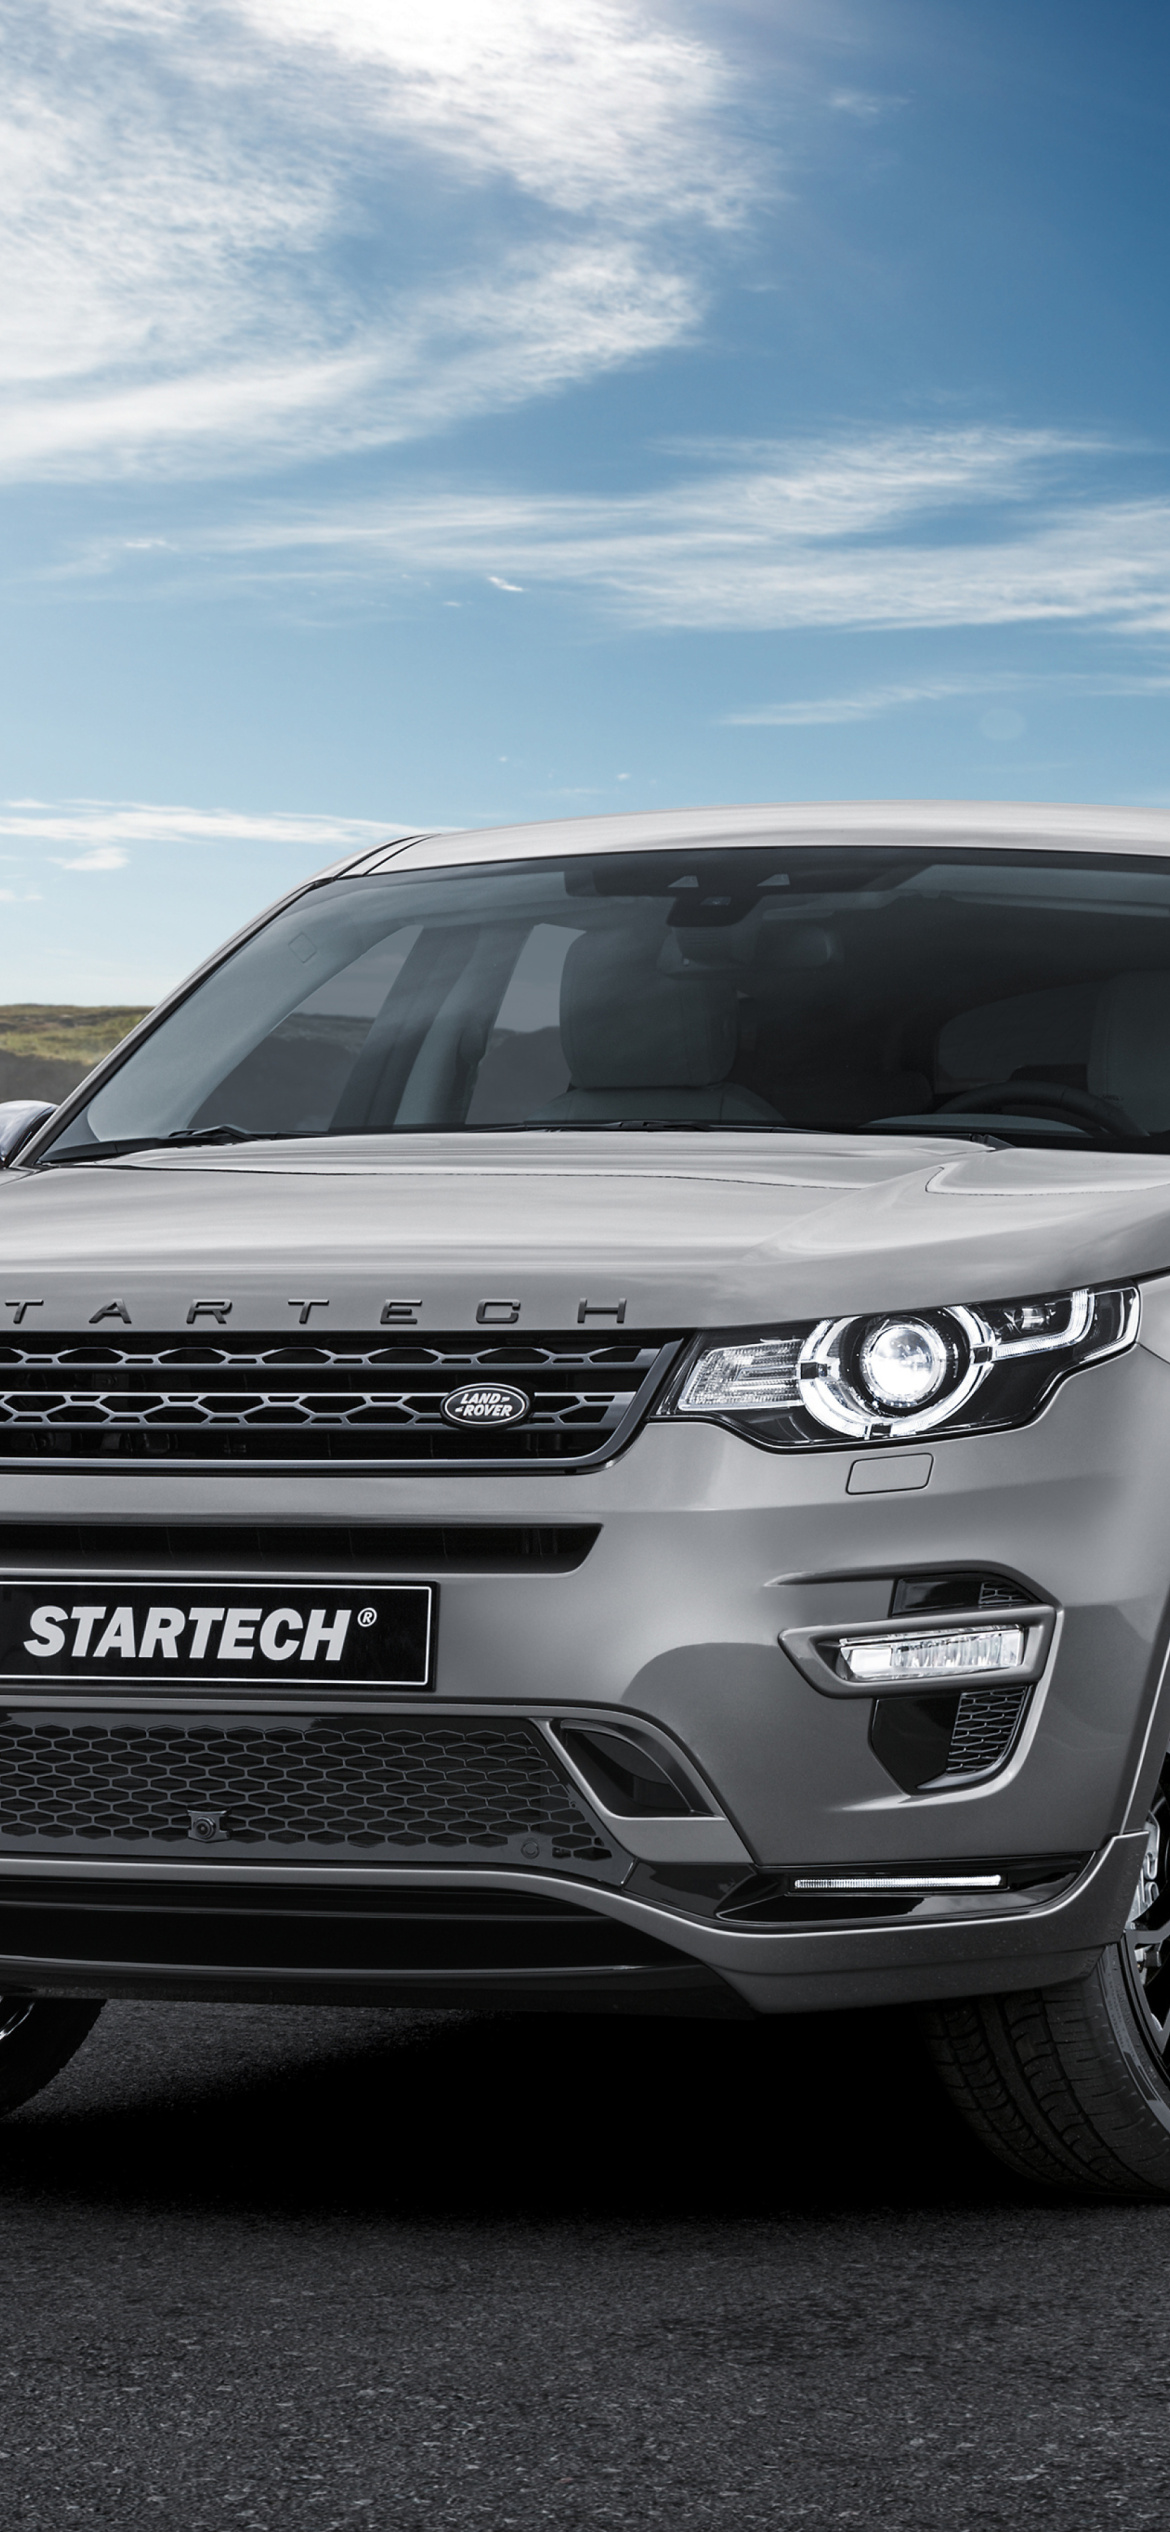 Land Rover Discovery Sport wallpaper 1170x2532